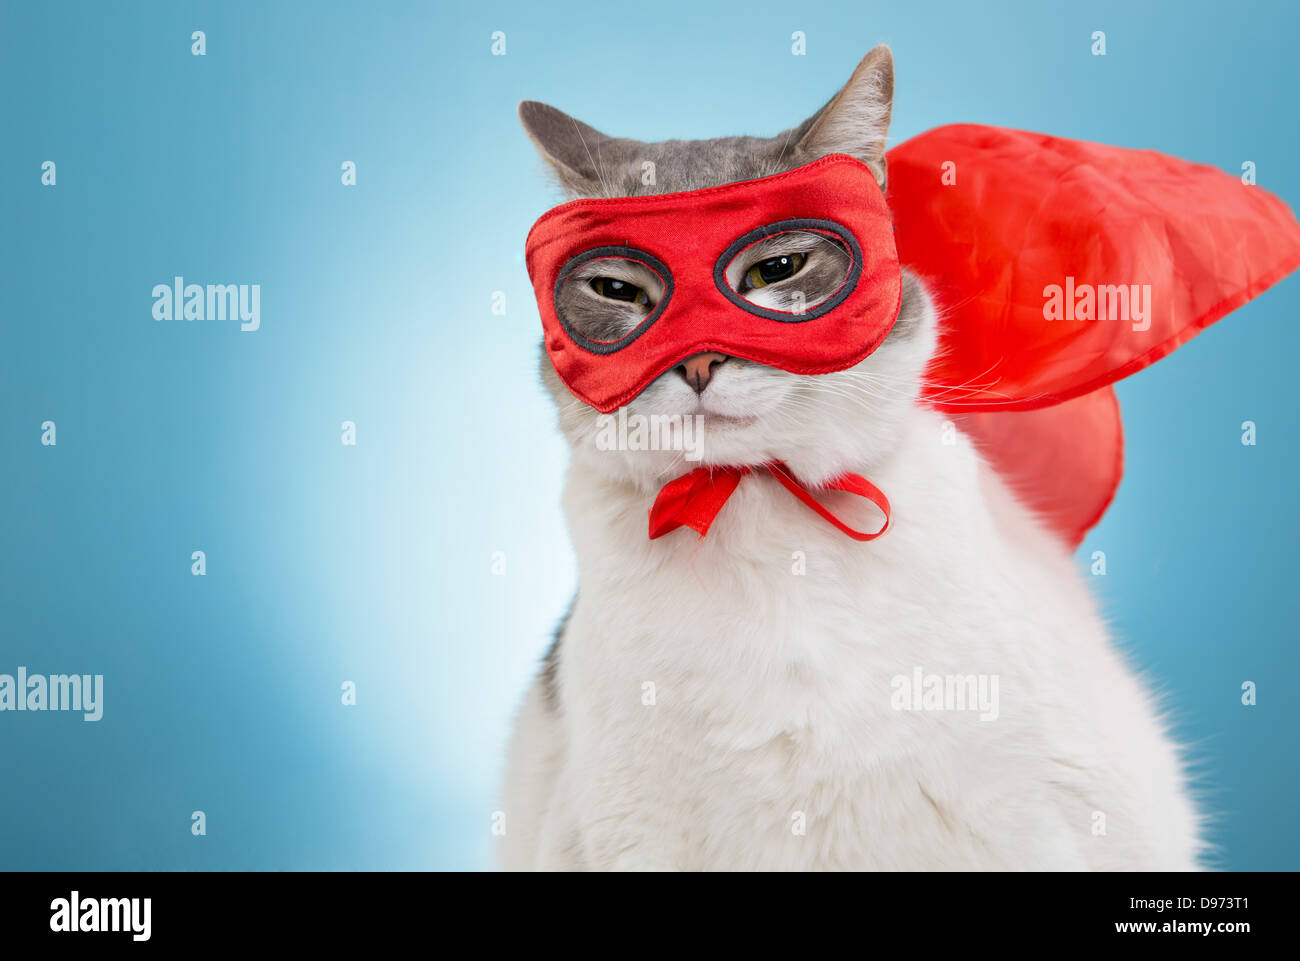 Cat adorned in red cape and mask in studio against blue background Stock Photo